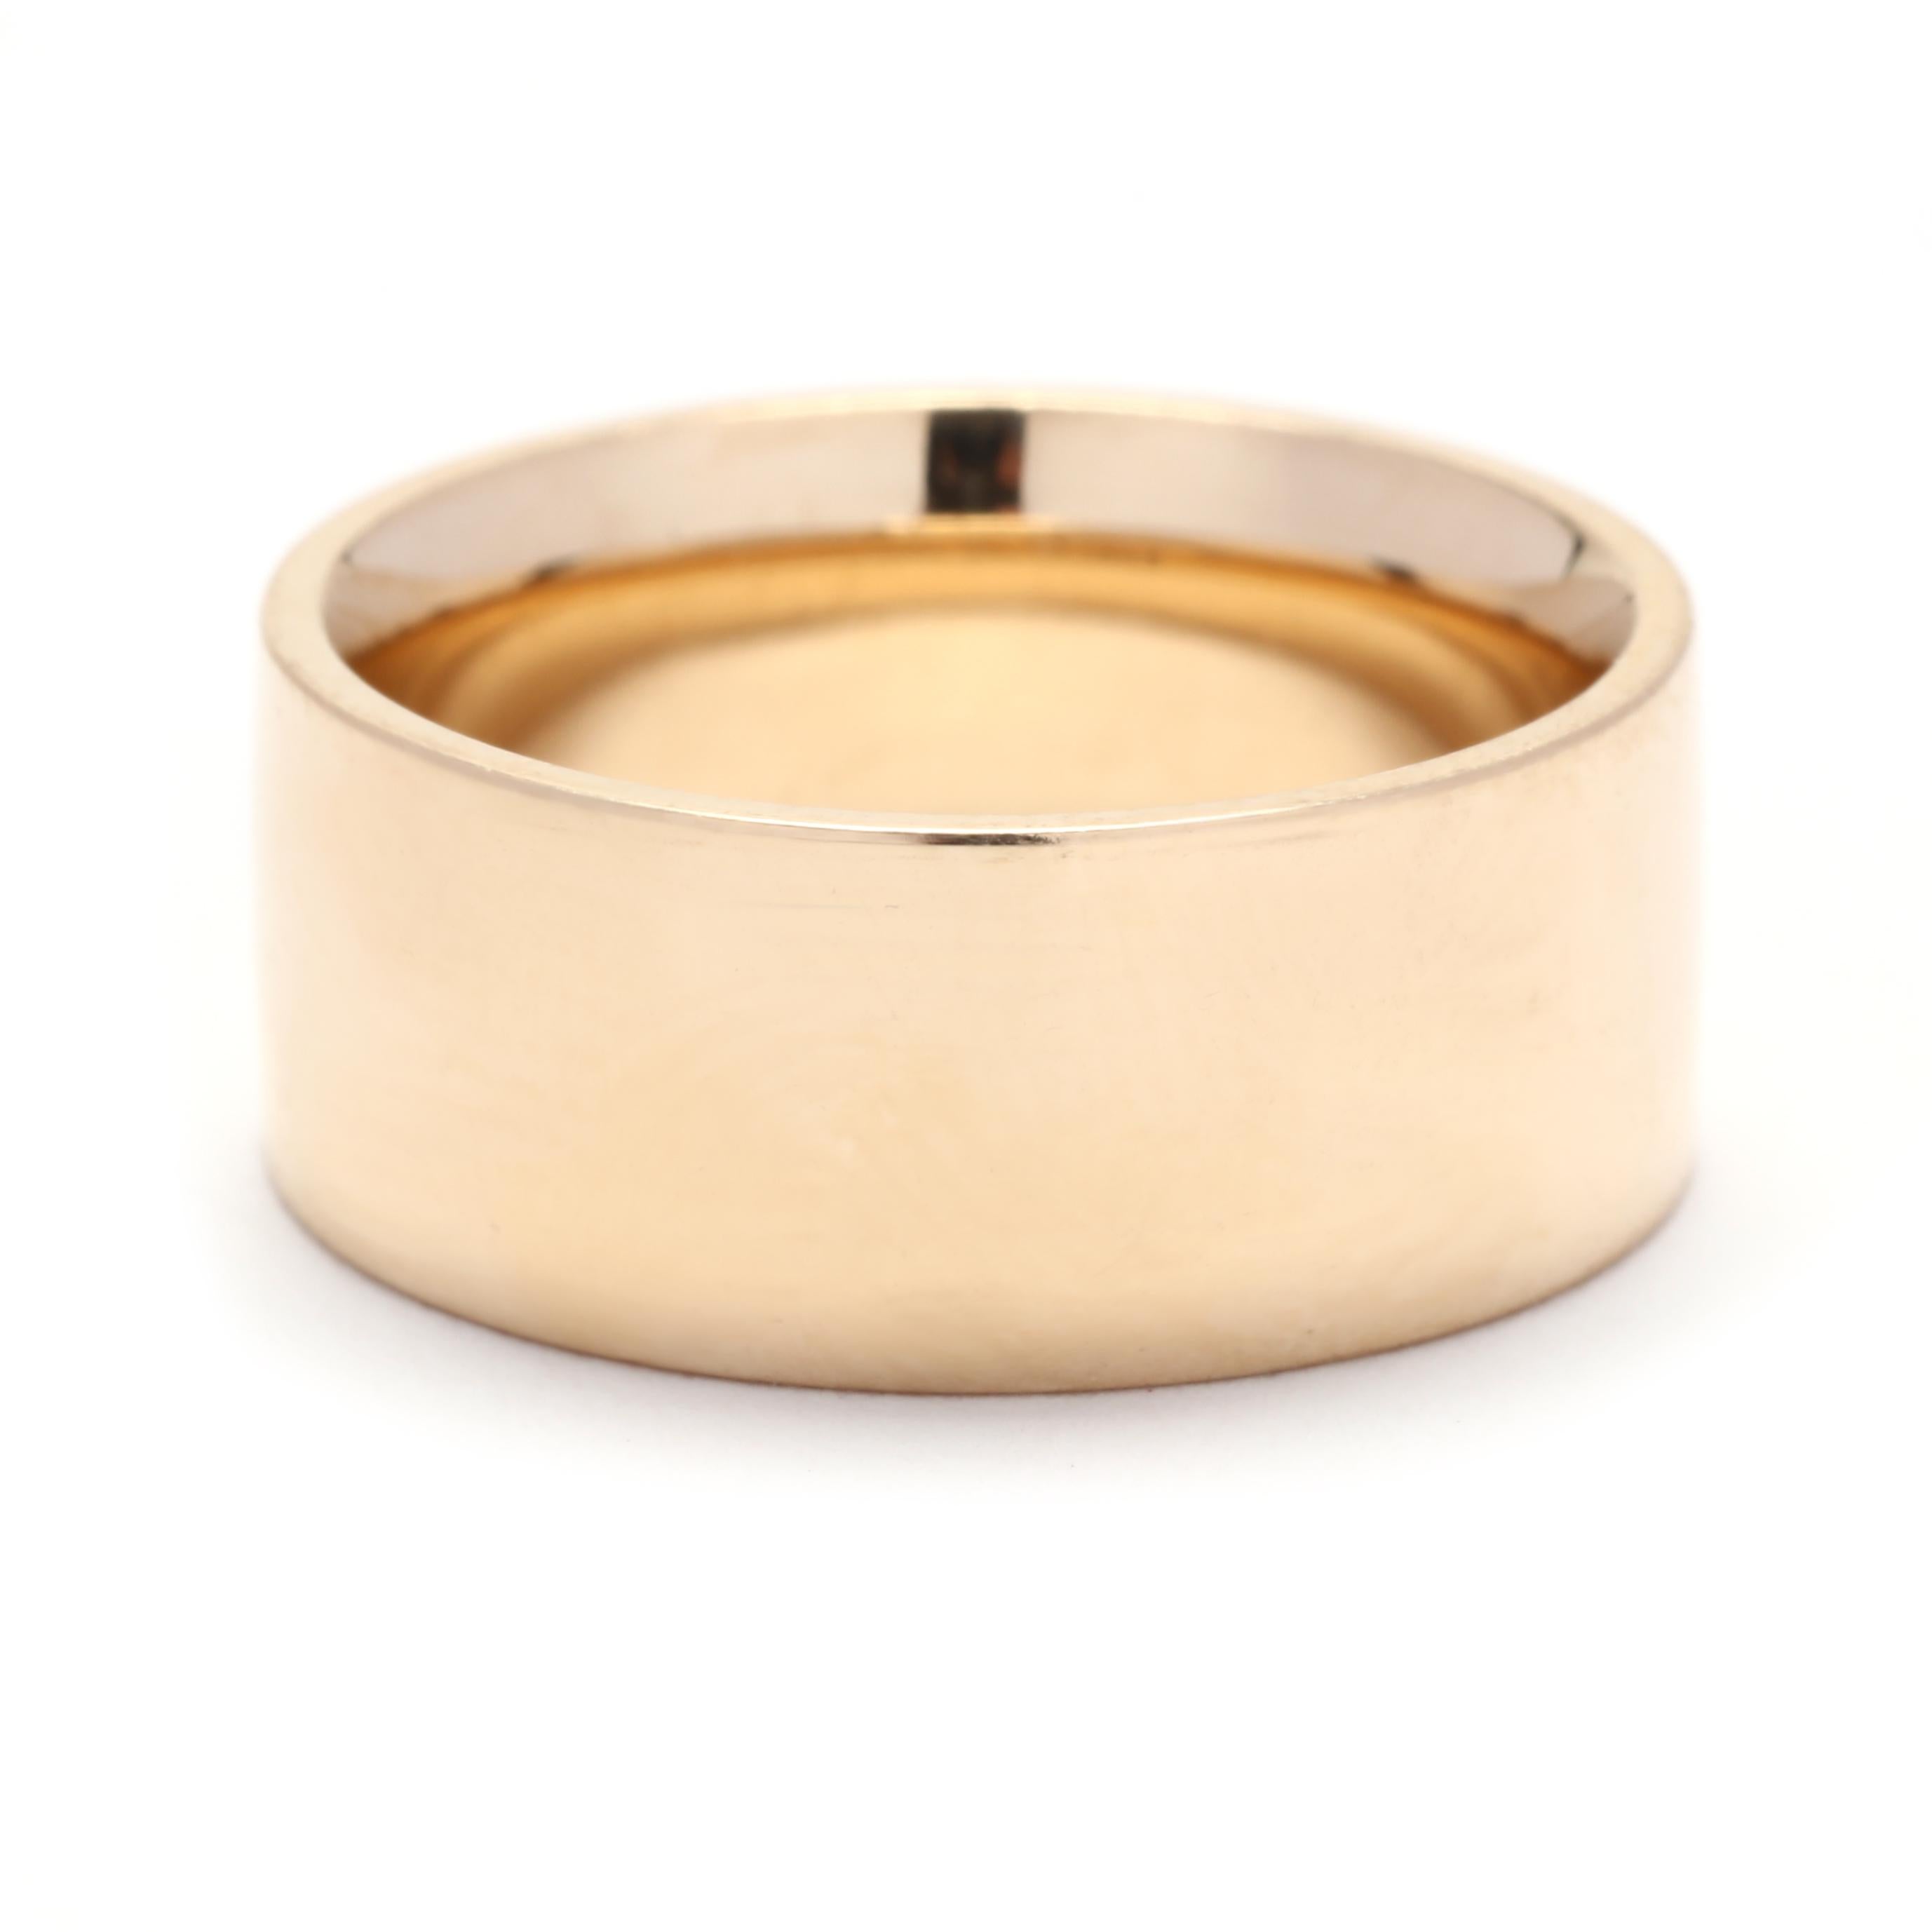 This wide gold cigar band is a stunning and unique piece of jewelry that will make a bold statement. Made from 14k yellow gold, it features a wide and solid design with a smooth and polished finish. With a ring size of 5, this cigar band is perfect